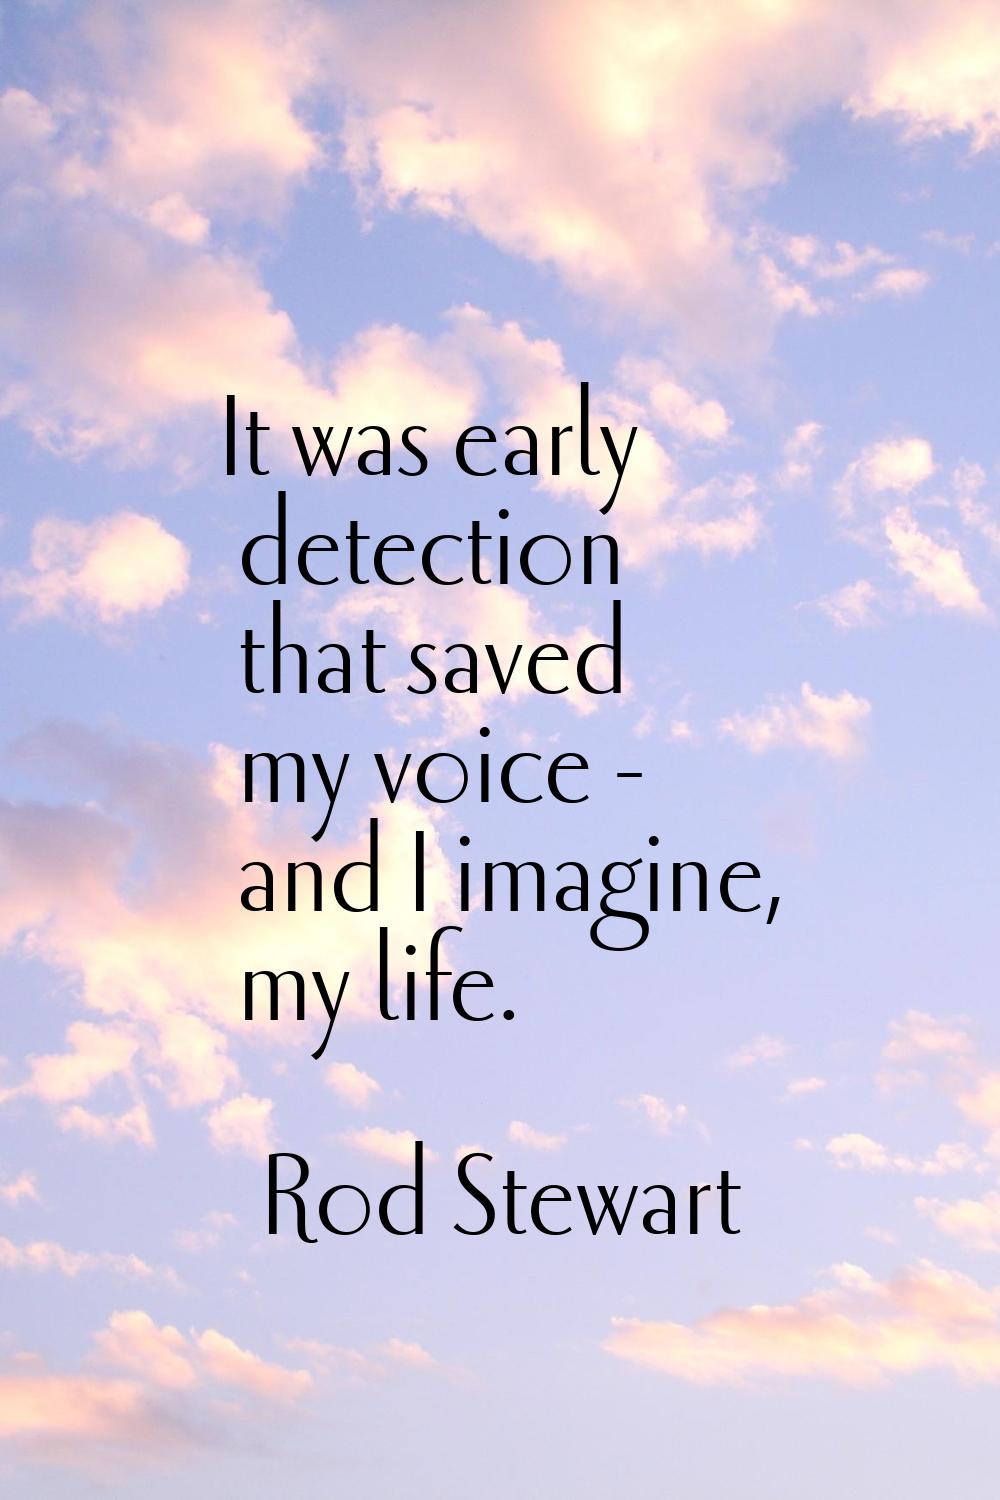 It was early detection that saved my voice - and I imagine, my life.